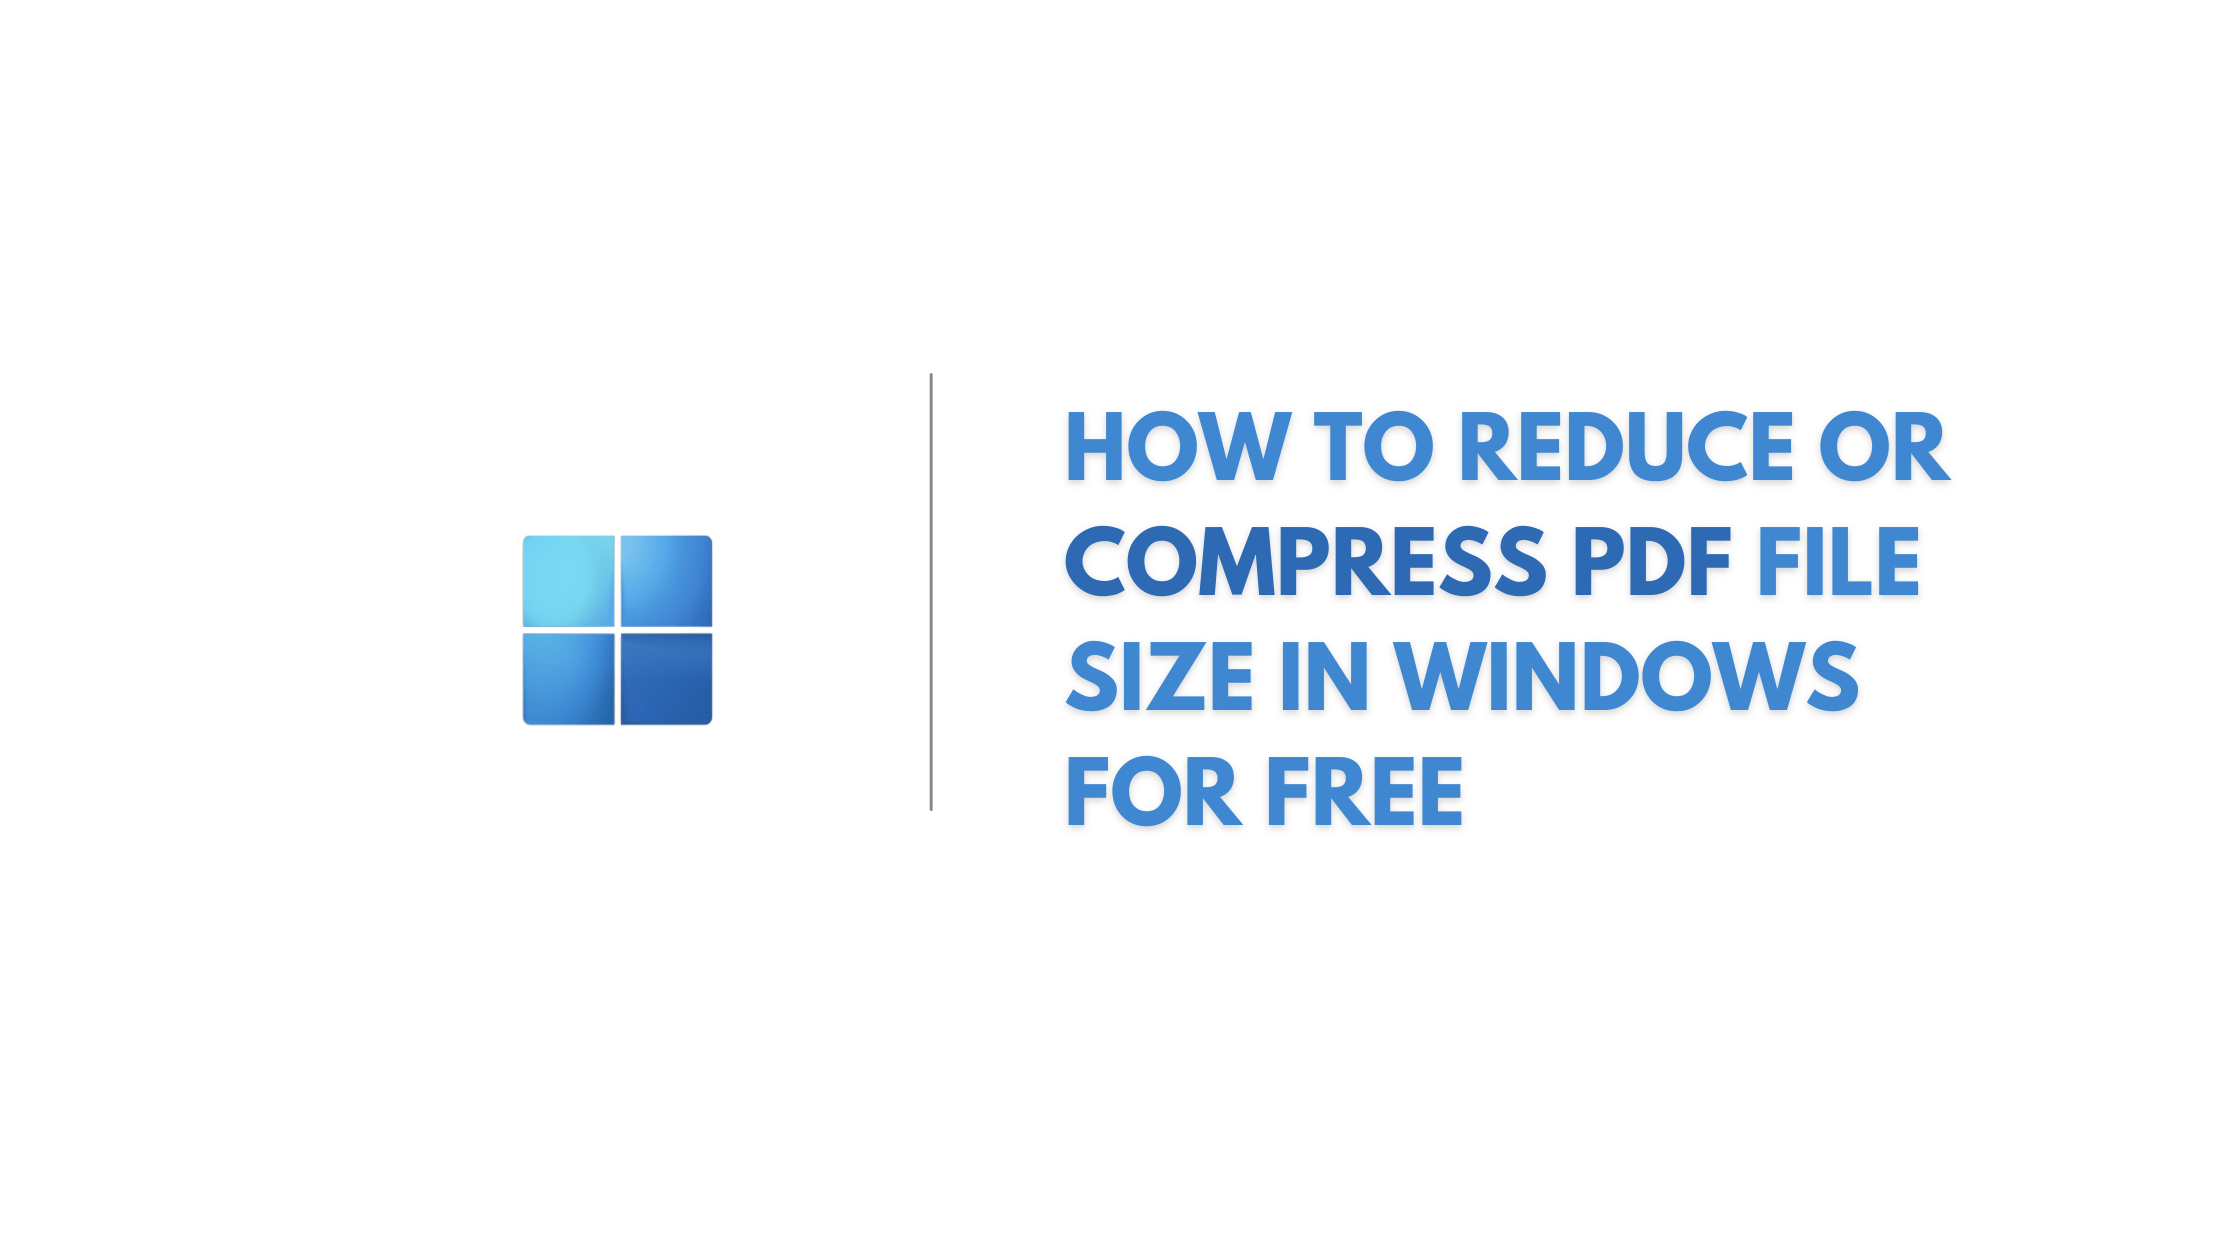 How To Reduce Or Compress Pdf File Size In Windows For Free  (2)